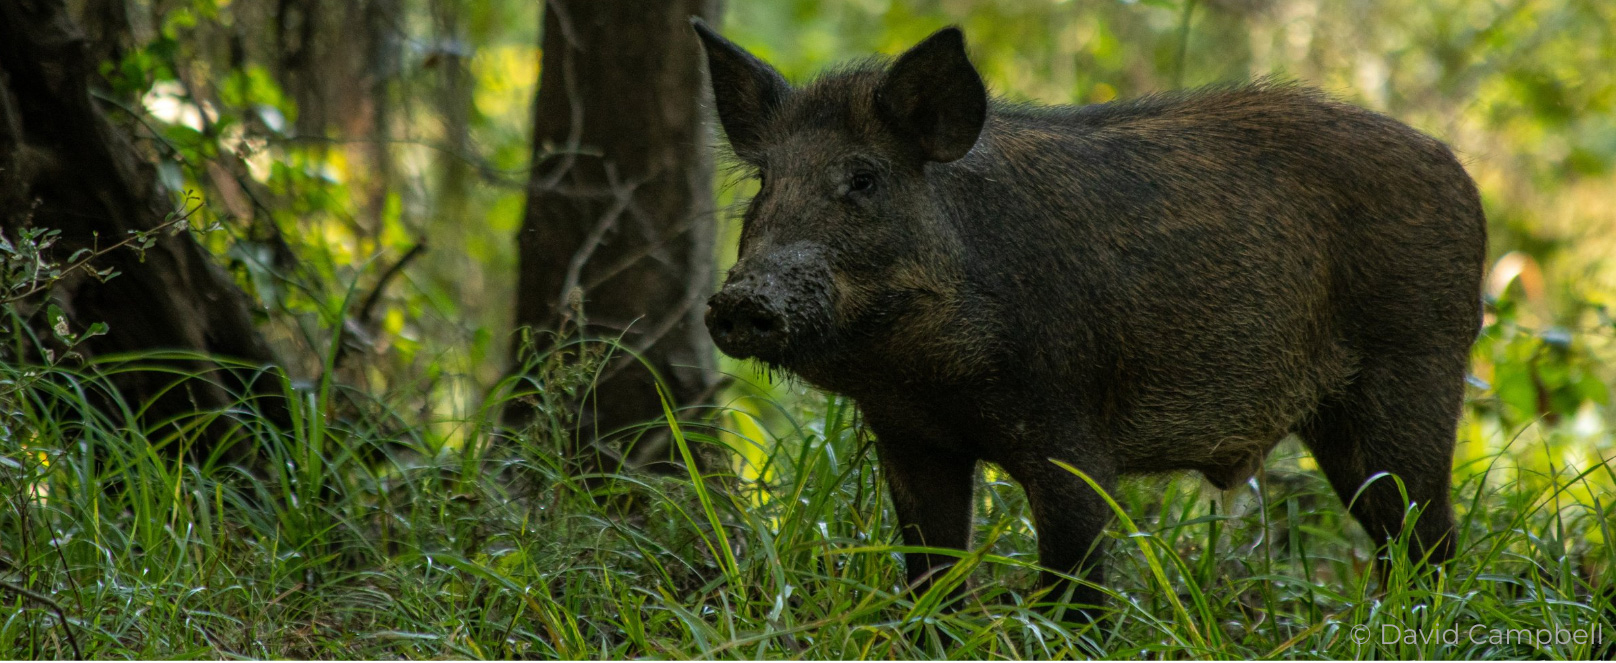 A male feral hog stand in a woodland environment with mud on his snout